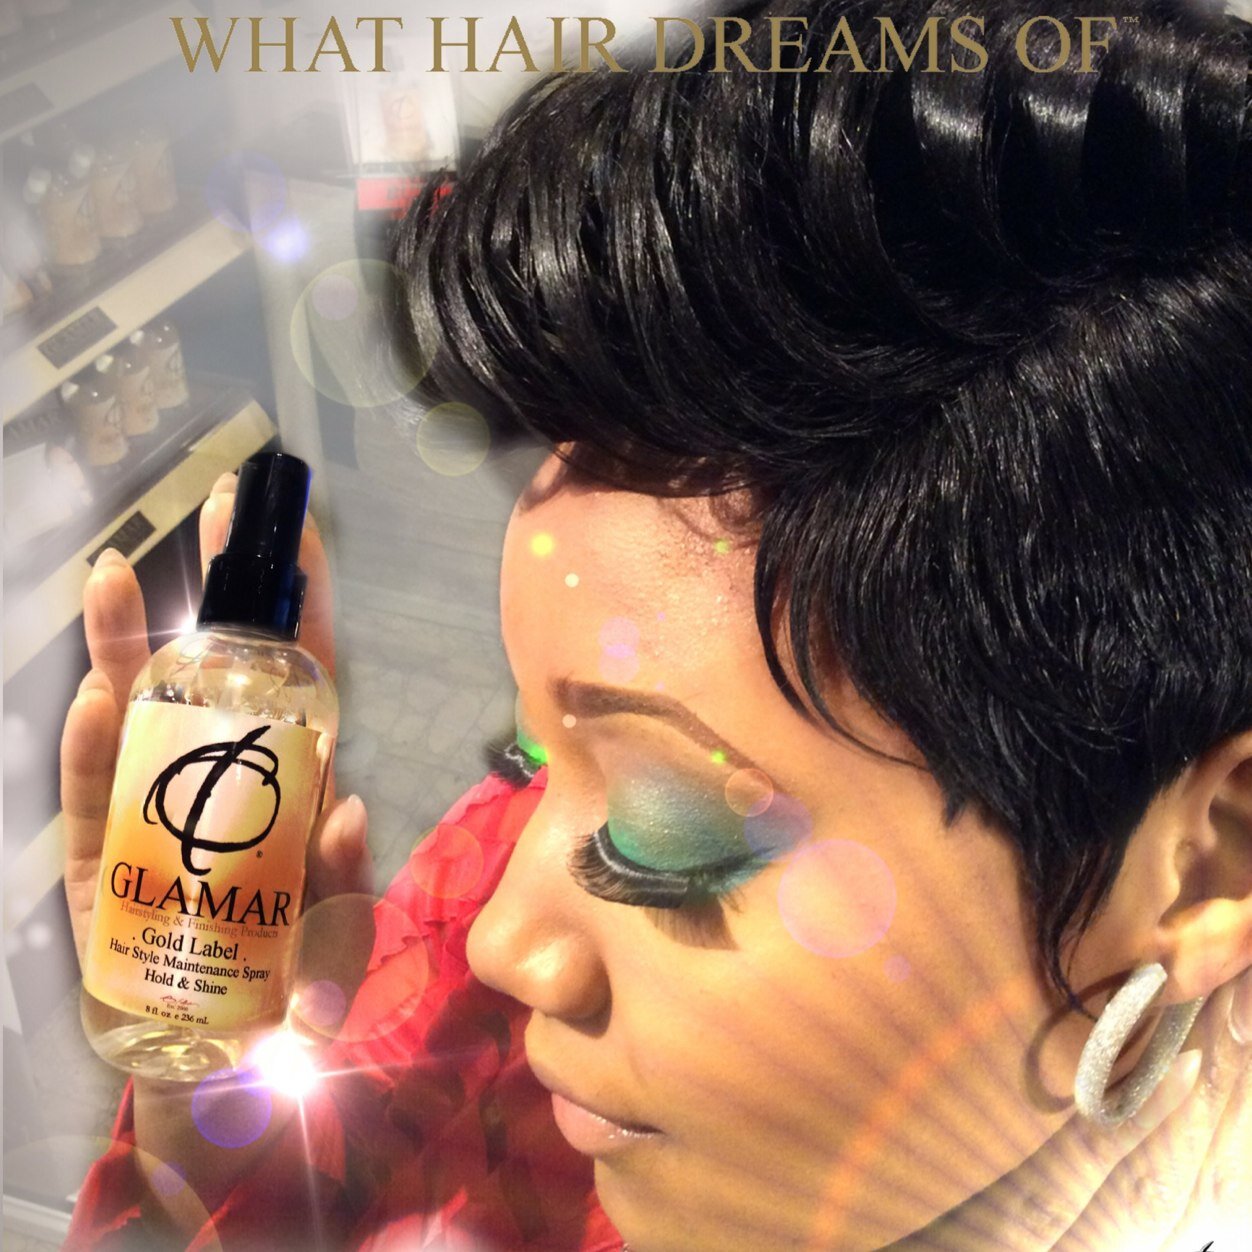 Cutting Edge Hair Care Brand Developed by World Renowned Platform Artist and Master Stylist Gerald LaMar